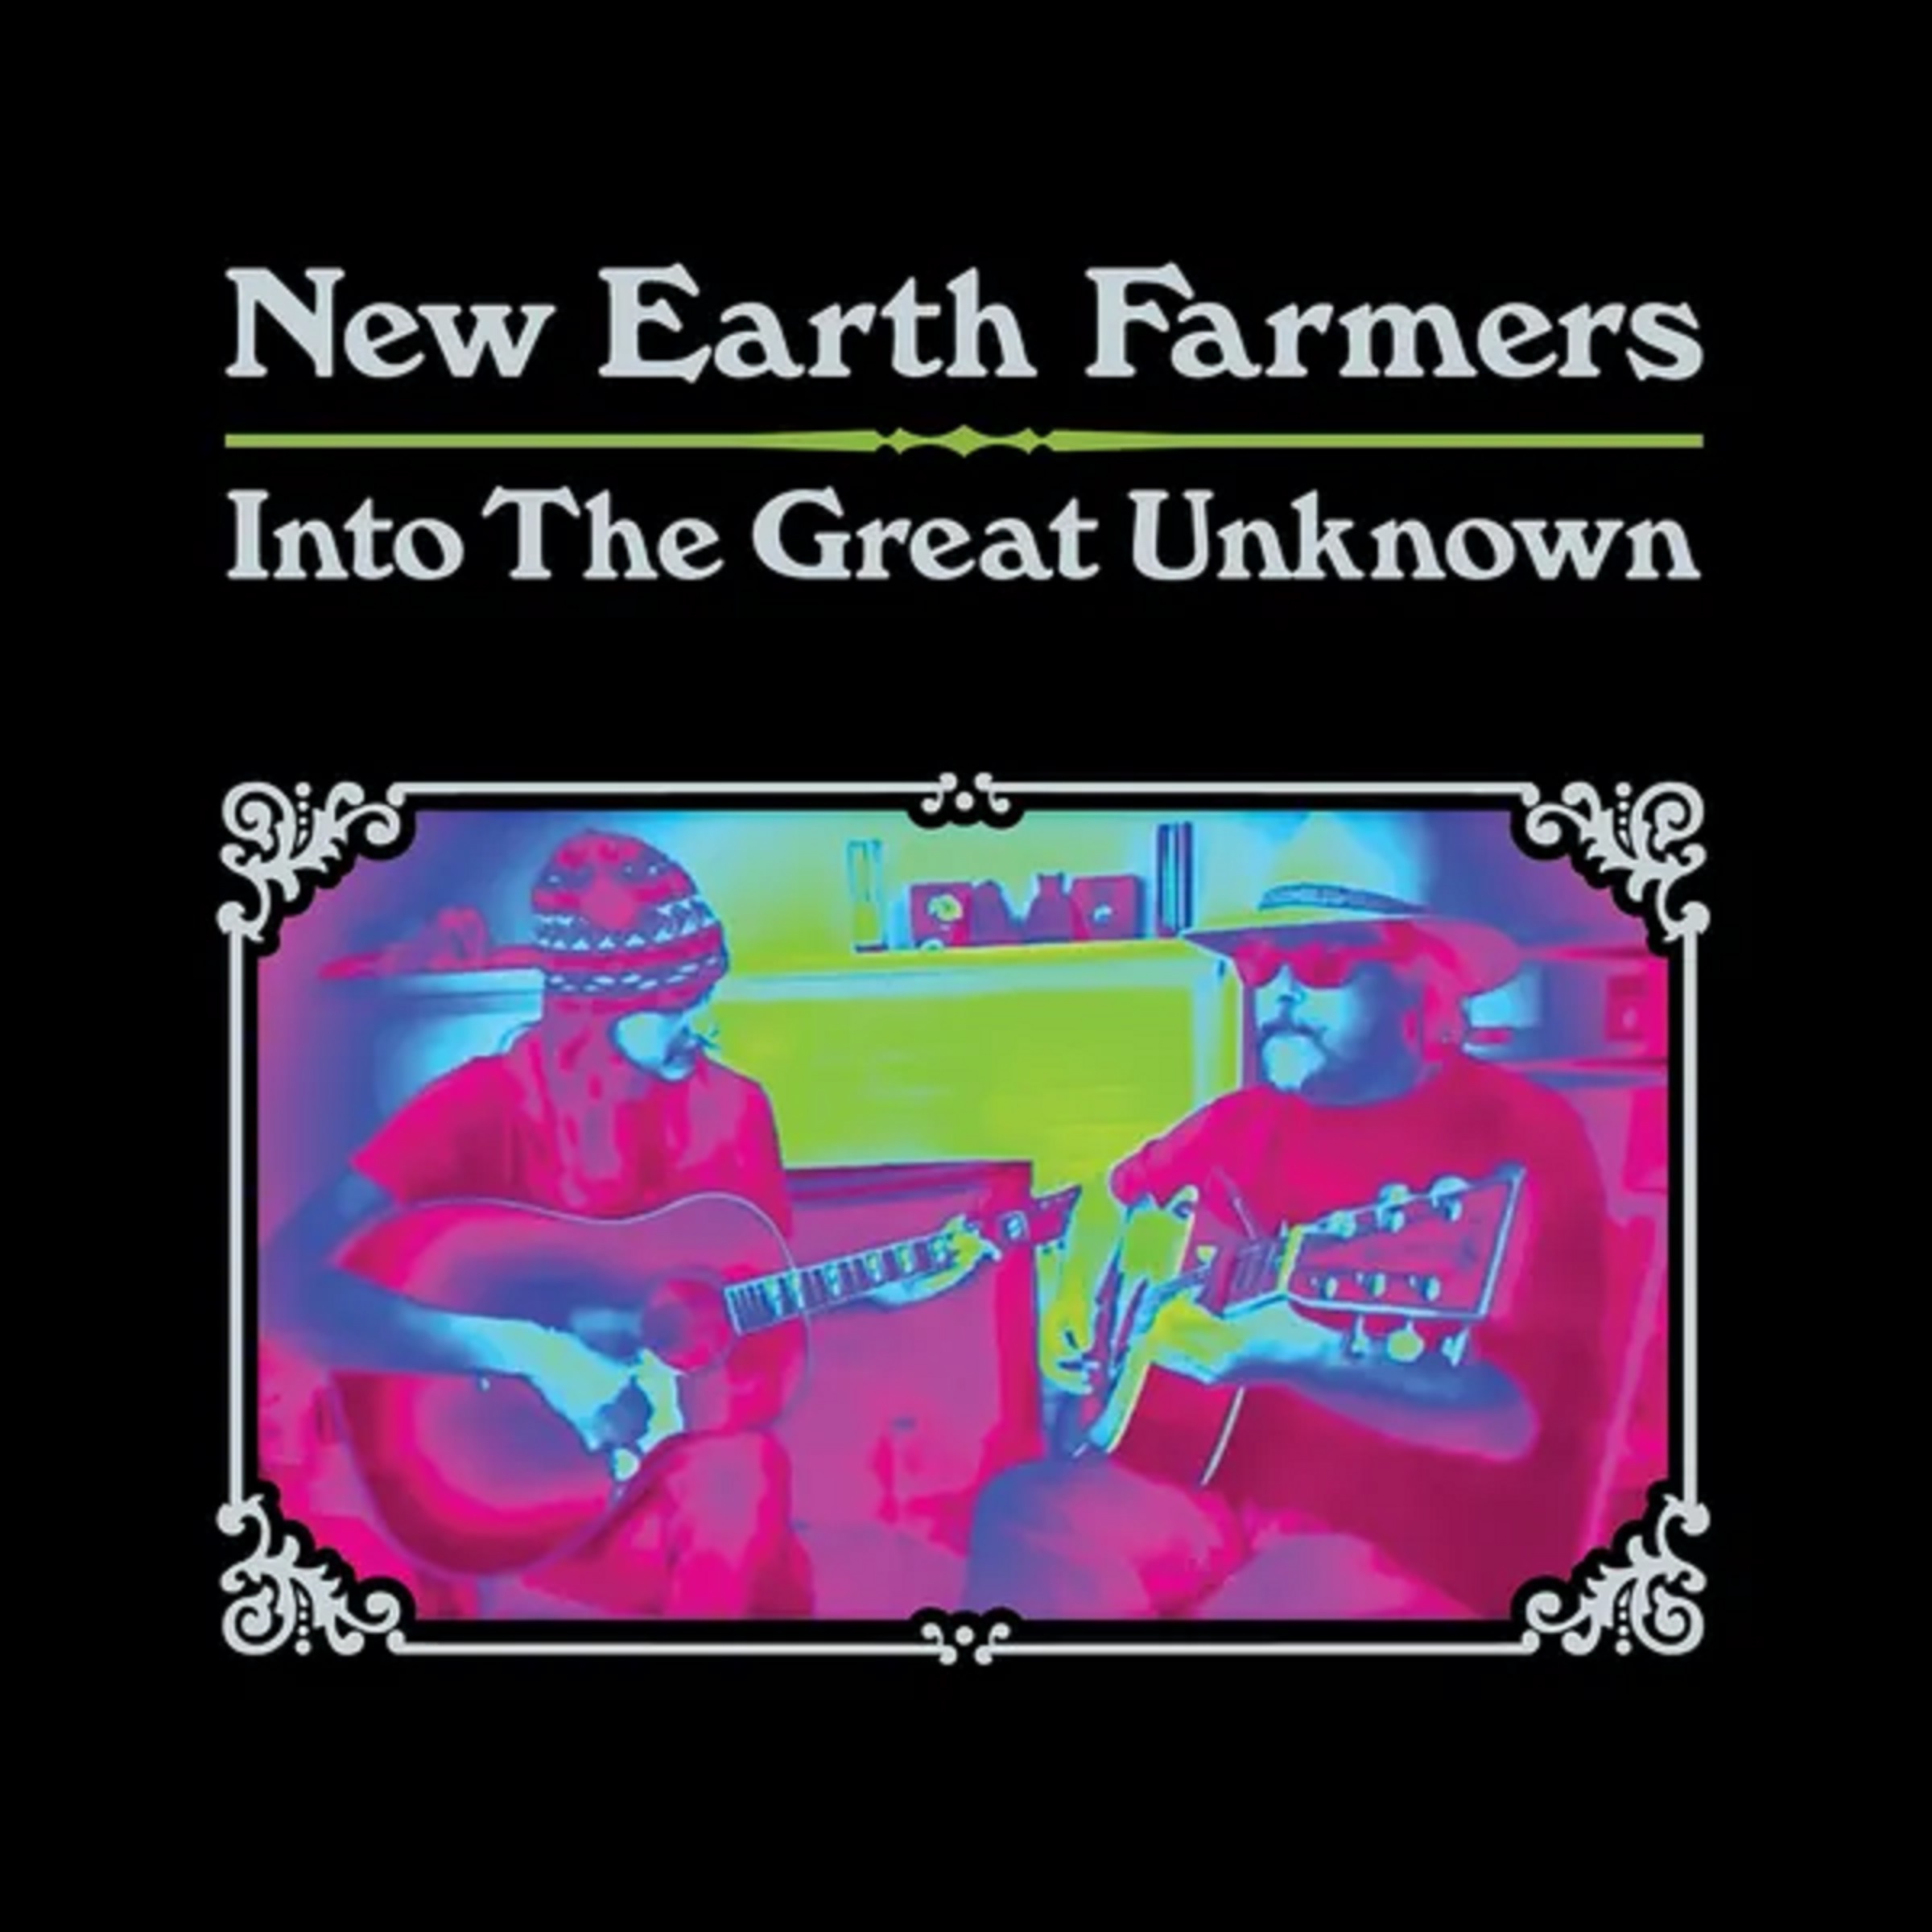 New Earth Farmers release new album, "Into The Great Unknown"